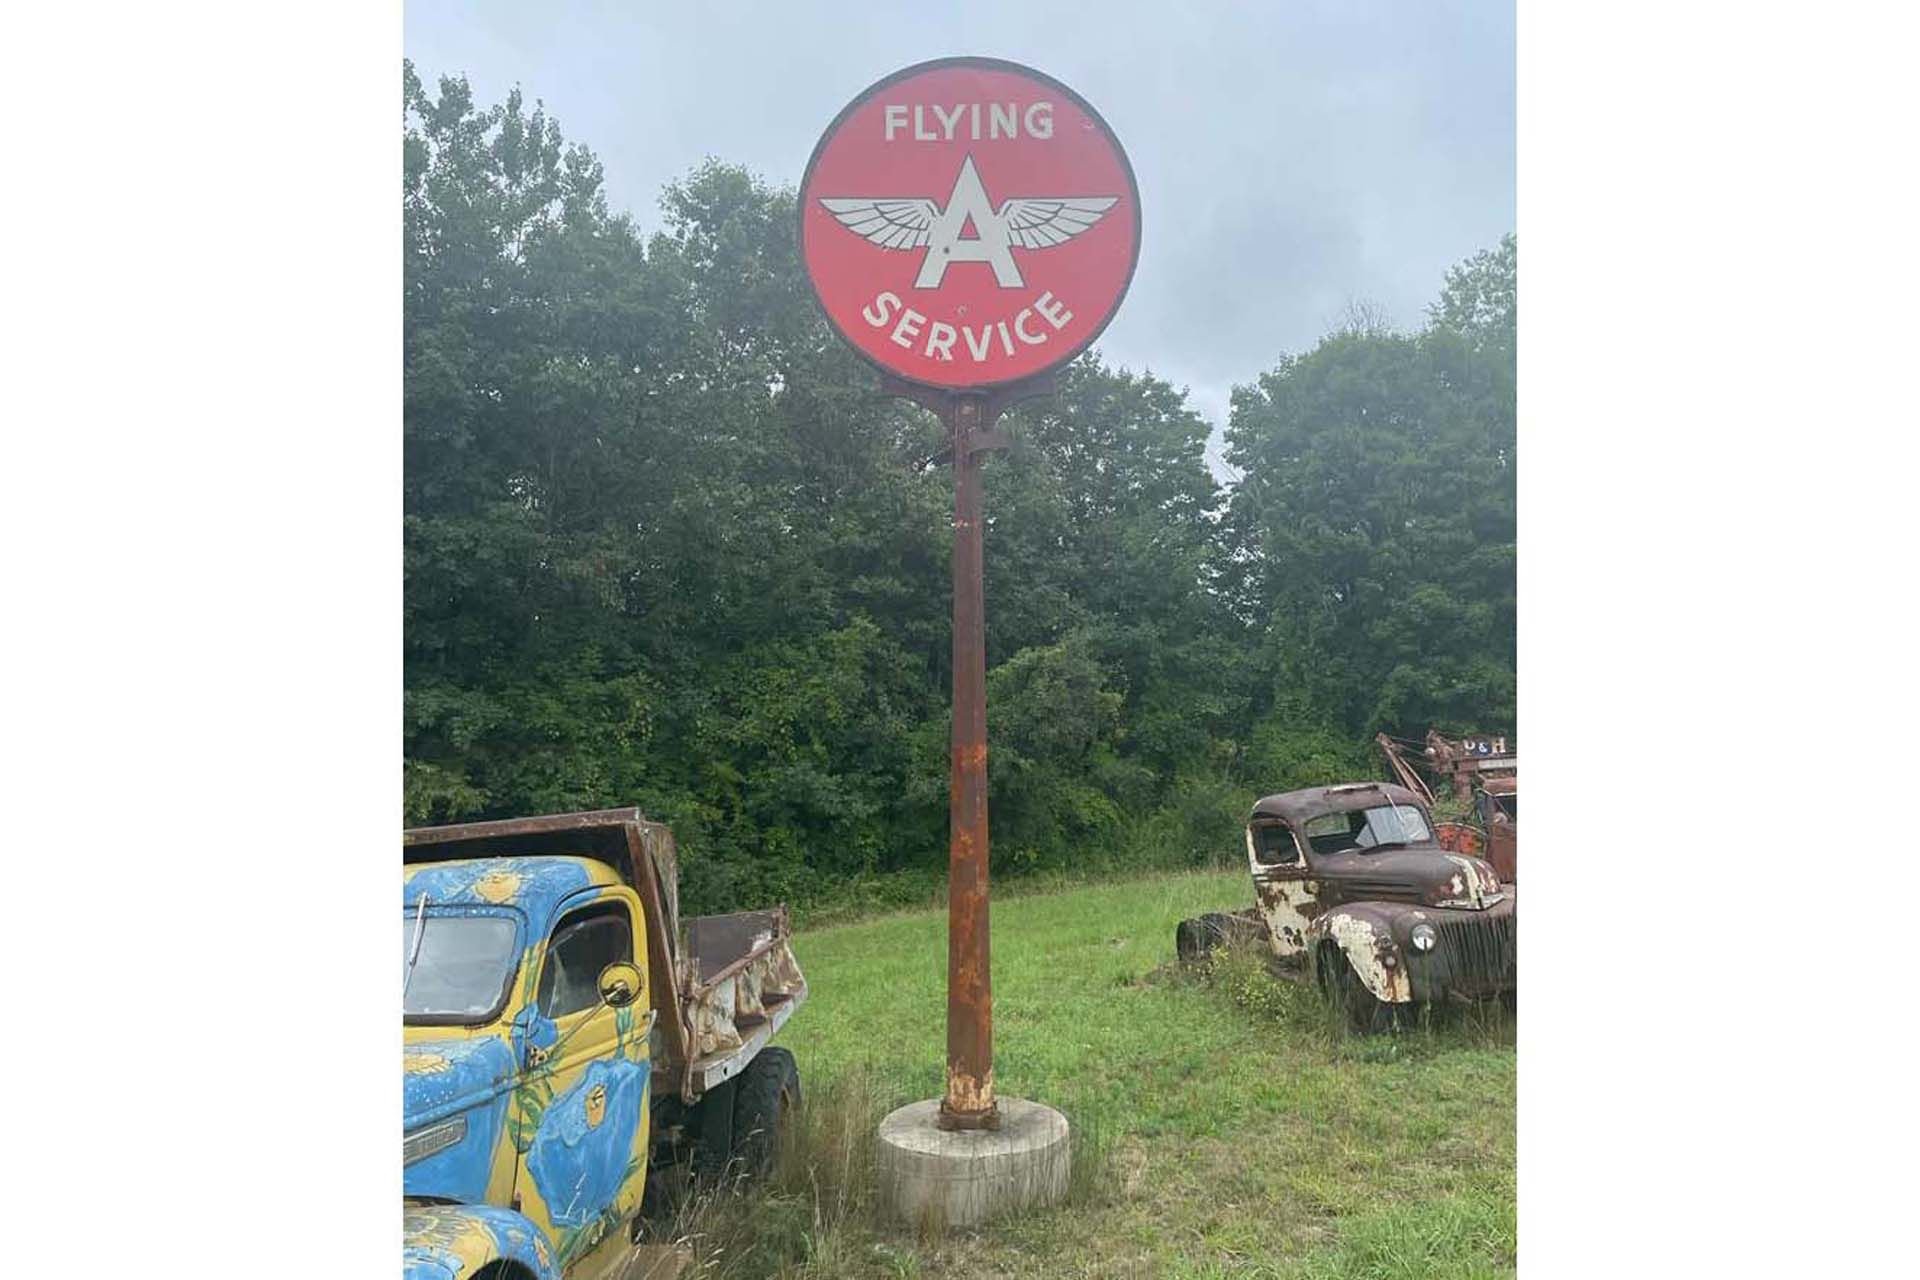 For Sale Very Large Flying A Service Station Double-Sided Porcelain Sign